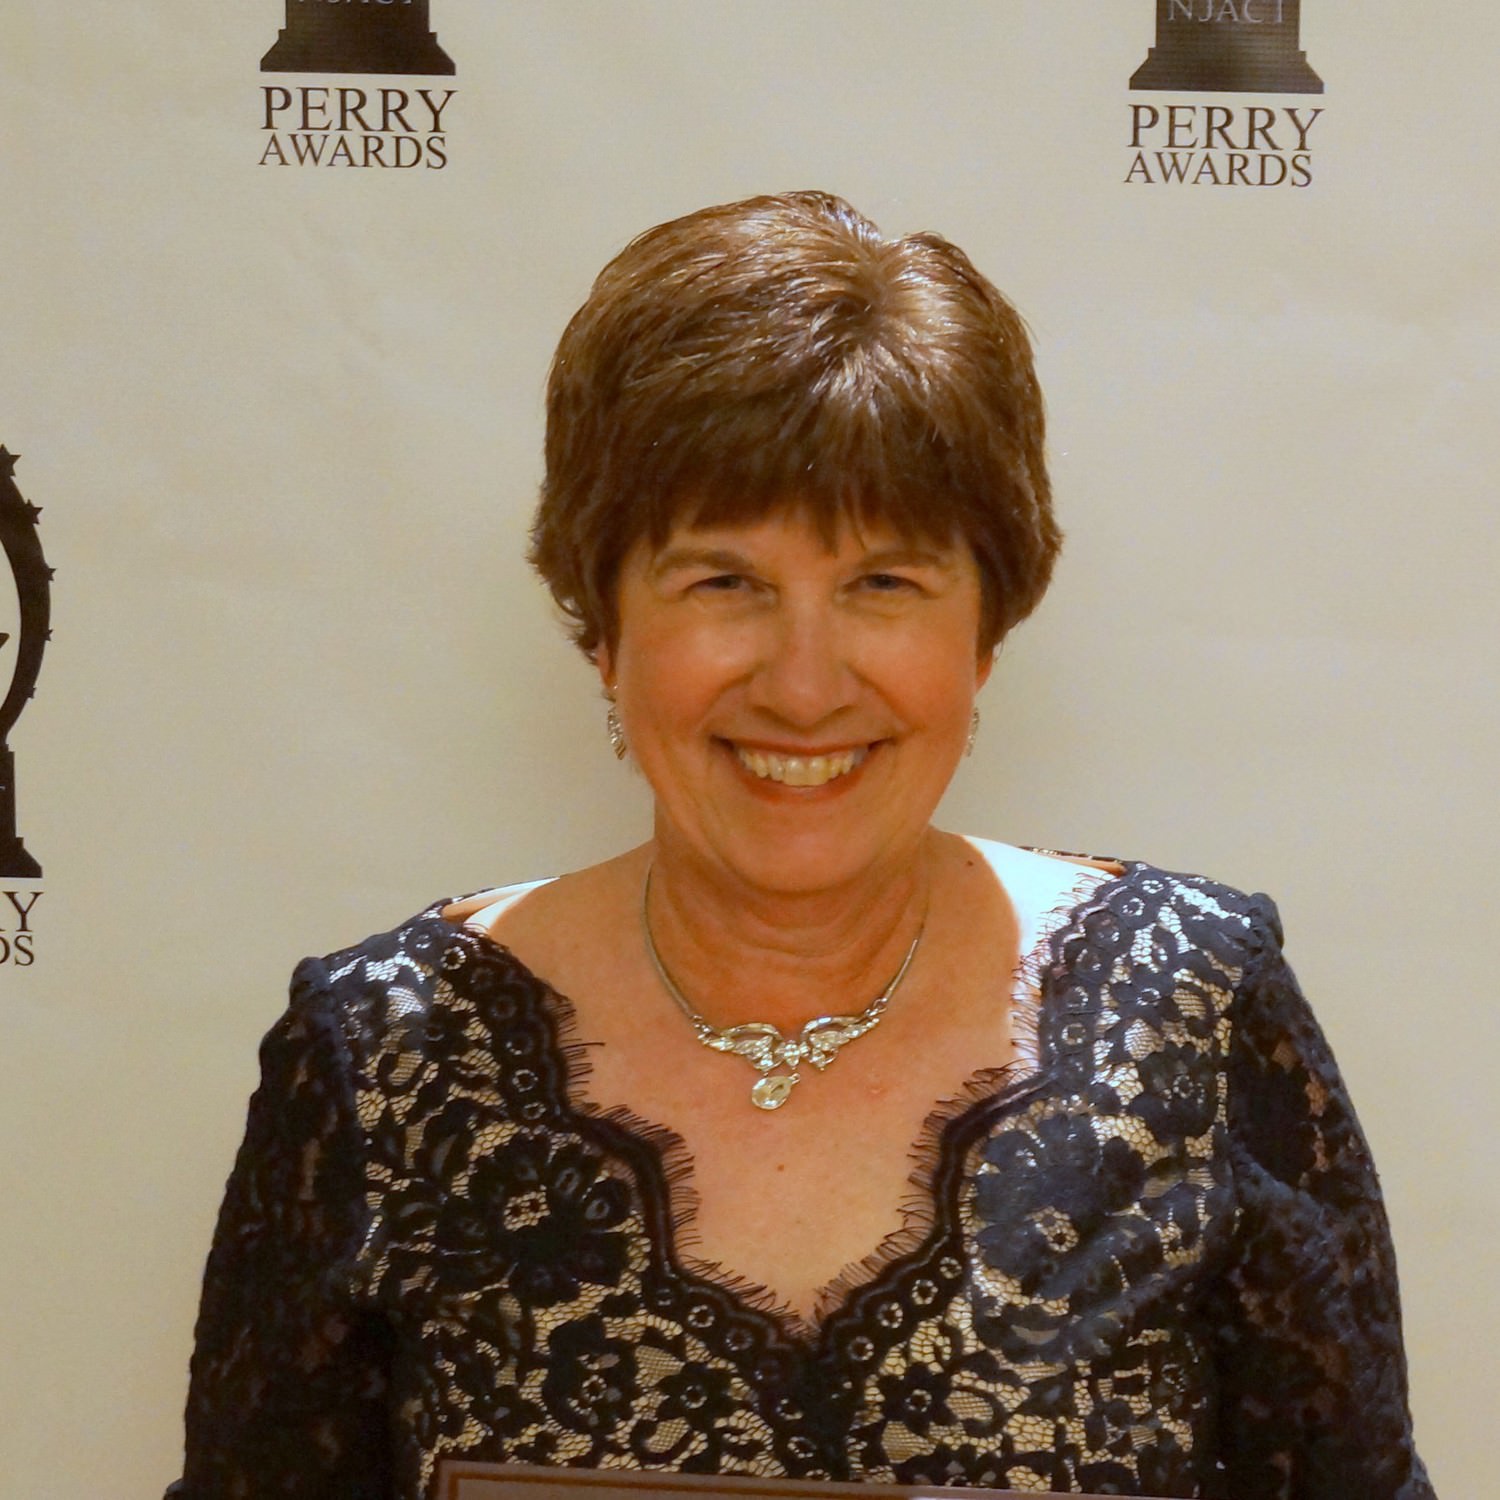 Carolyn B. Newman, director and producer of ShowKids Invitational Theatre (SKIT) since the company’s inception in 1986, is a 2015 inductee into the New Jersey Association of Community Theater’s (NJACT) Perry Award Hall of Fame. 1